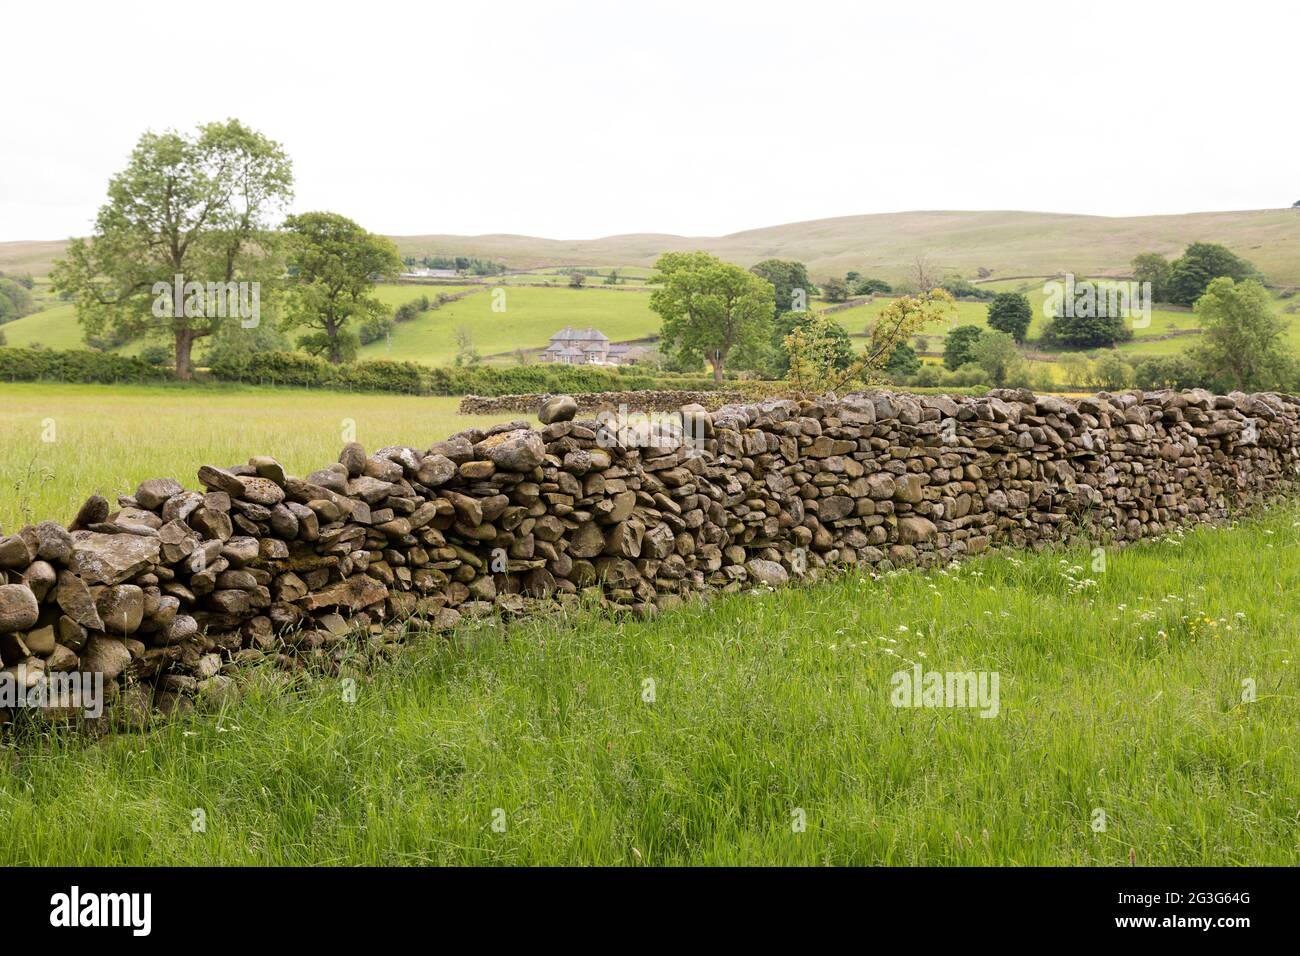 Dry stone wall in a field near Sedbergh in Cumbria, England. Sedbergh is in the Yorkshire Dales National Park. Stock Photo